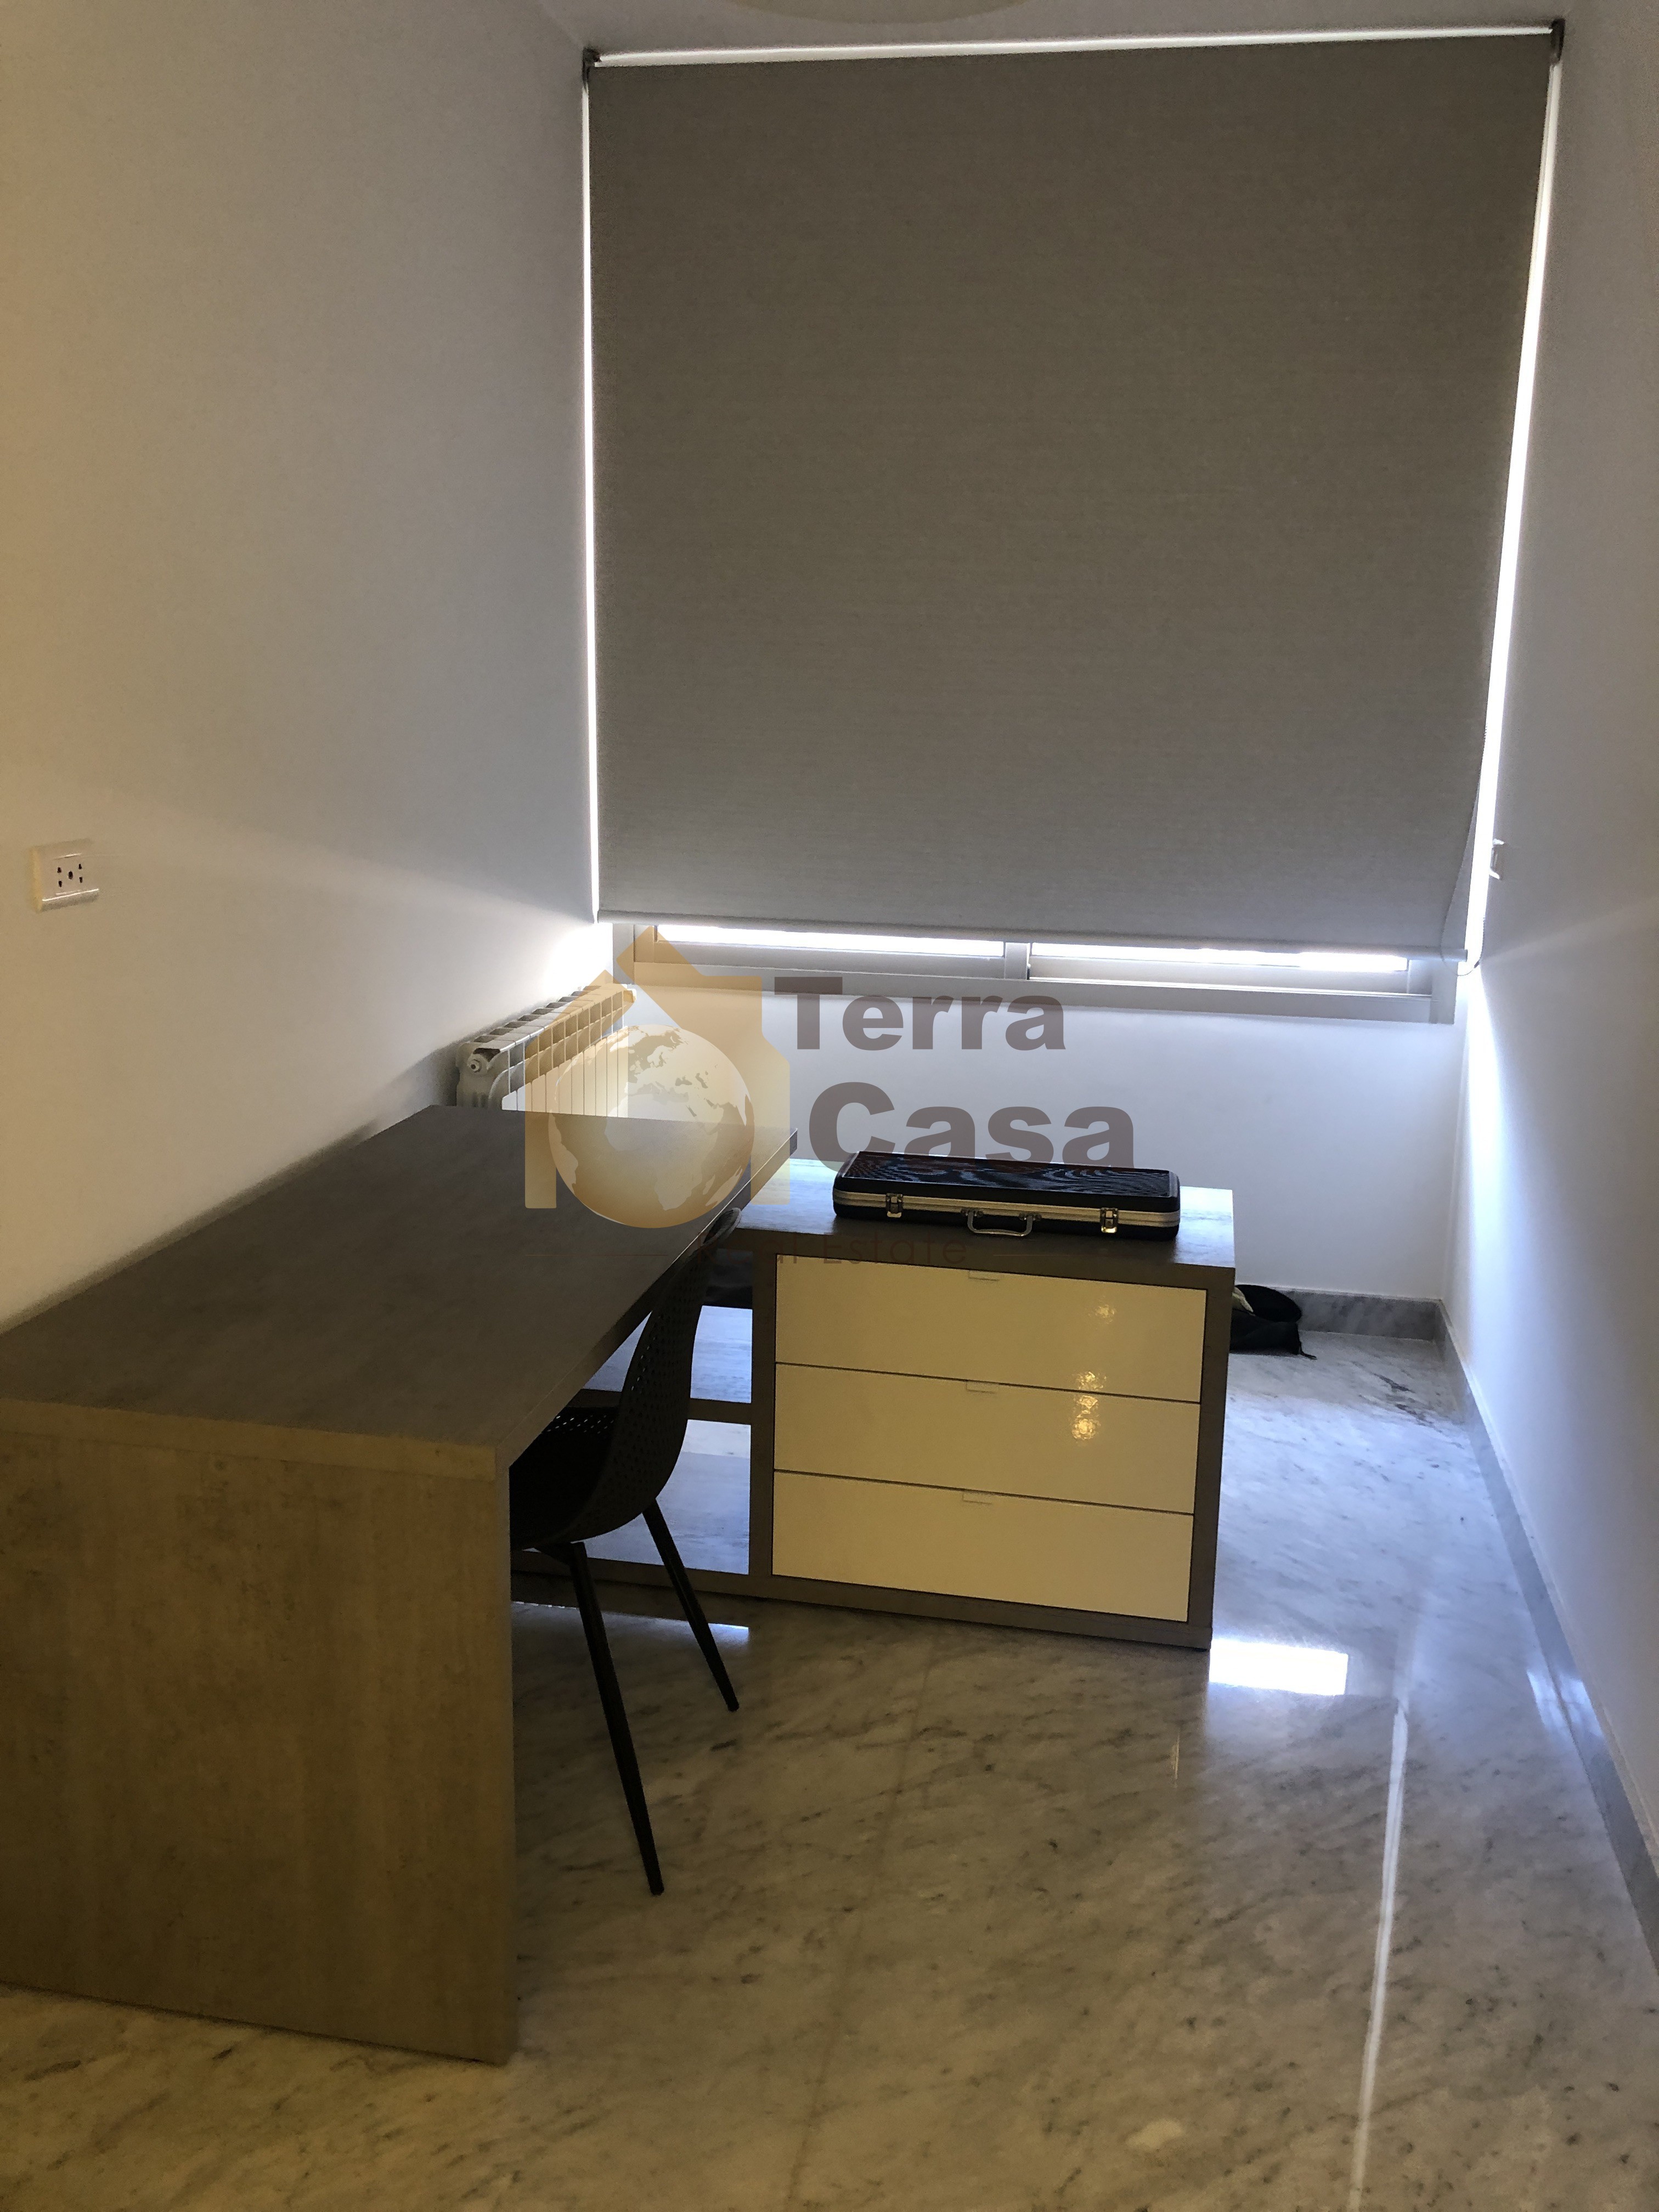 Hamra apartment fully furnished for rent.